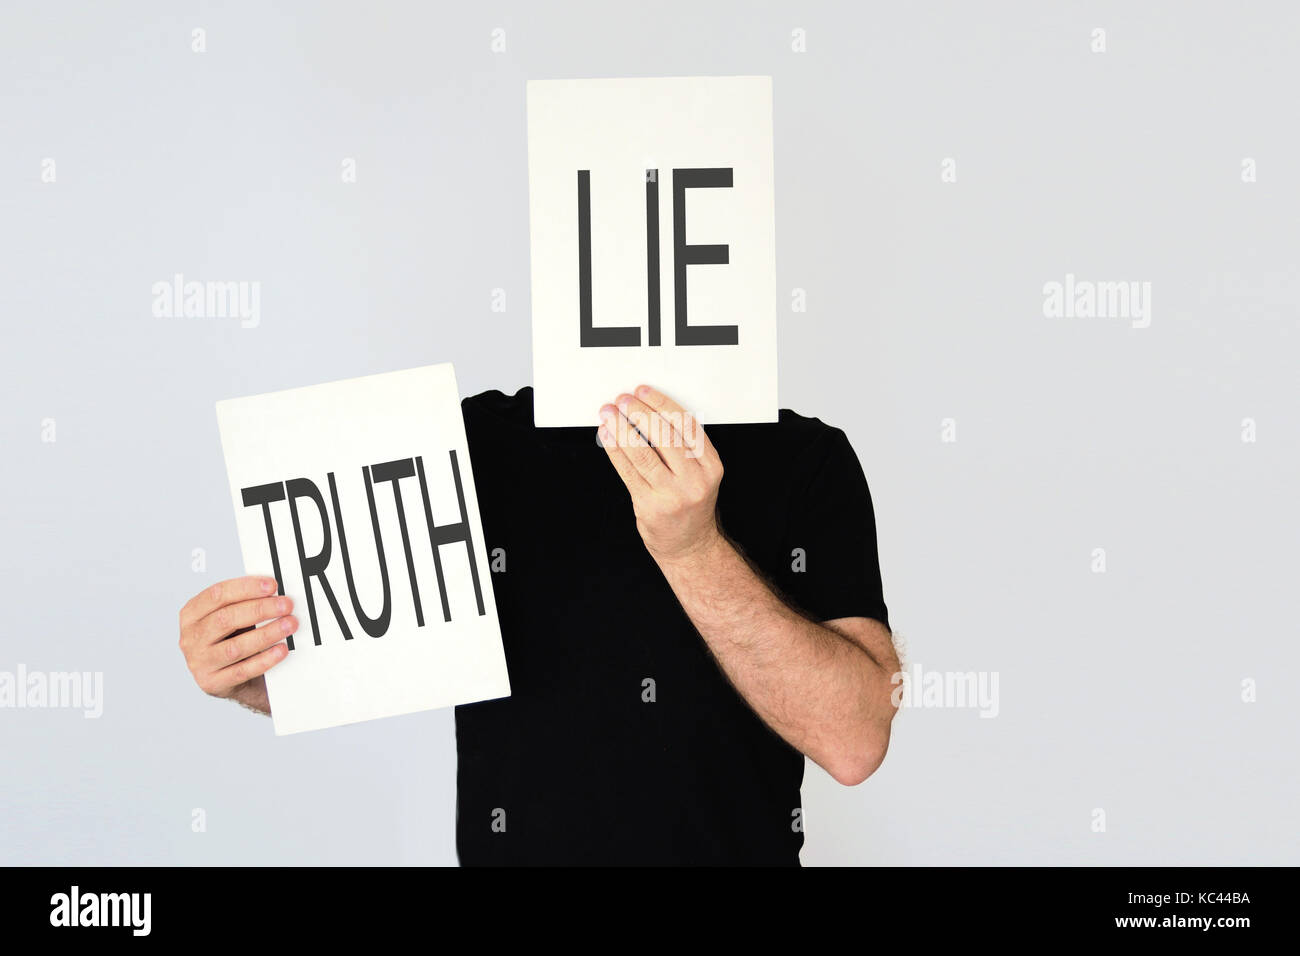 Man holding two cards with the words Lie and Truth representing different falsehood. Duality concept. Stock Photo